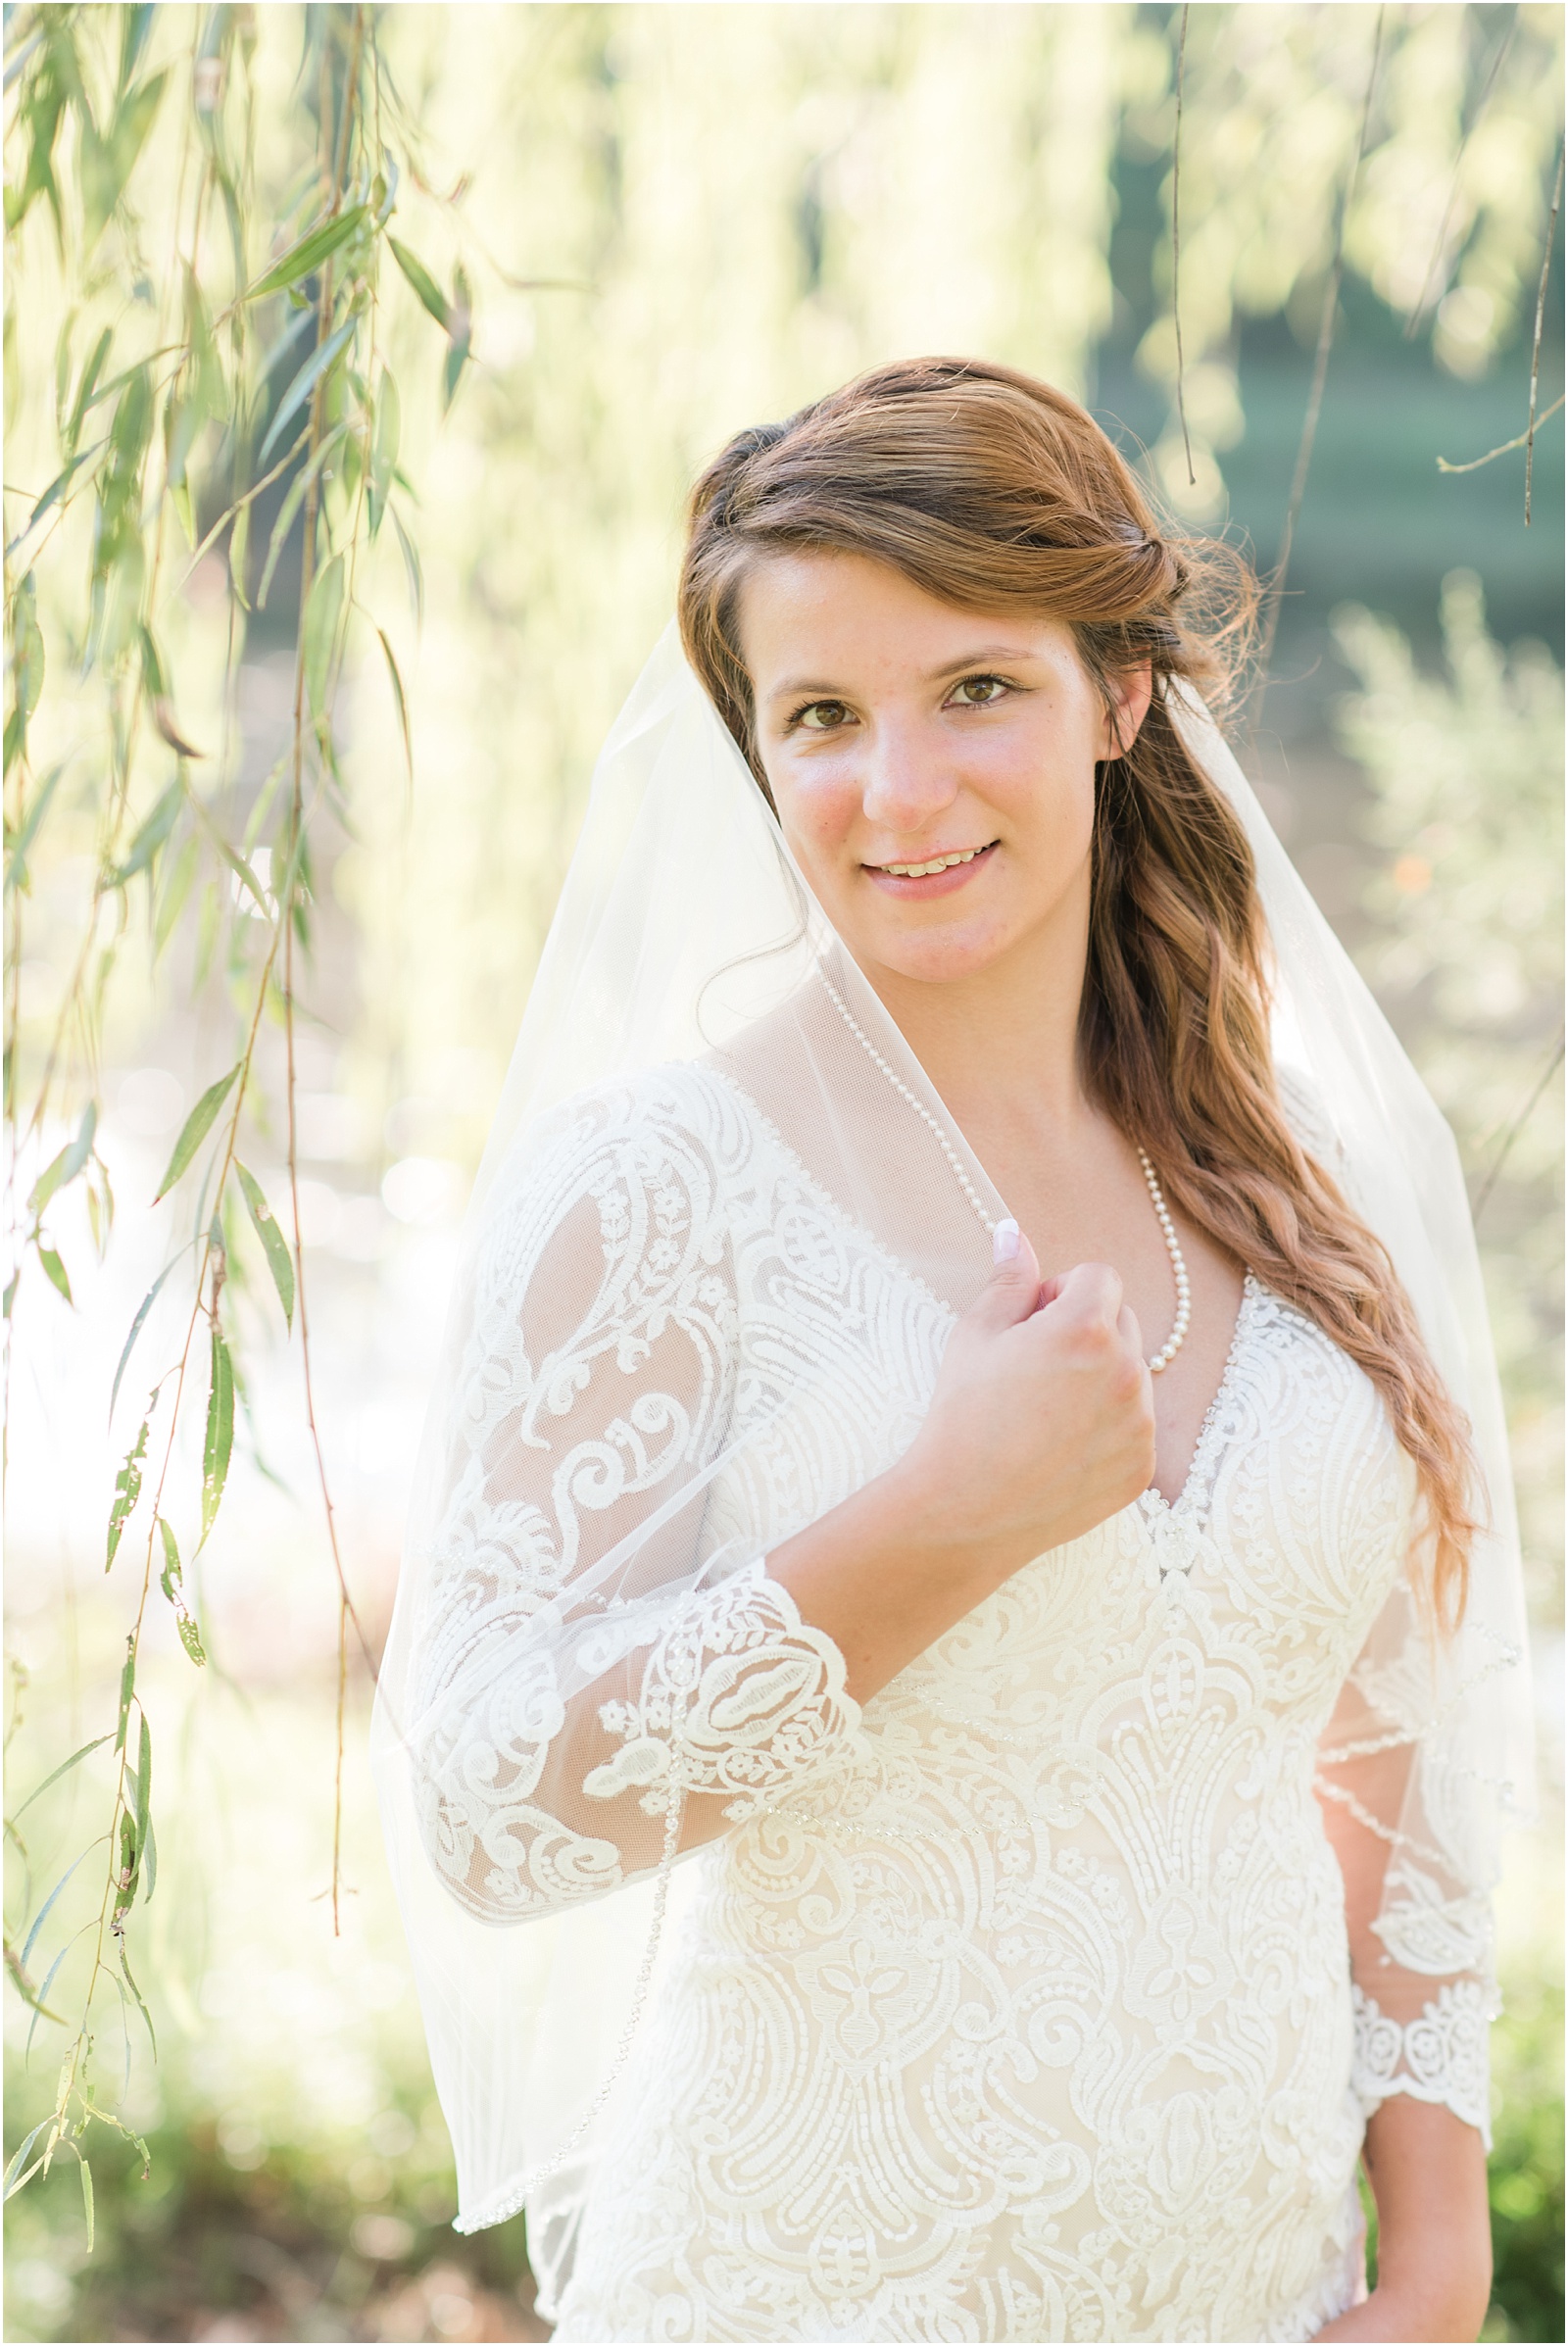 bride holding on to her veil while looking at the camera under willow tree